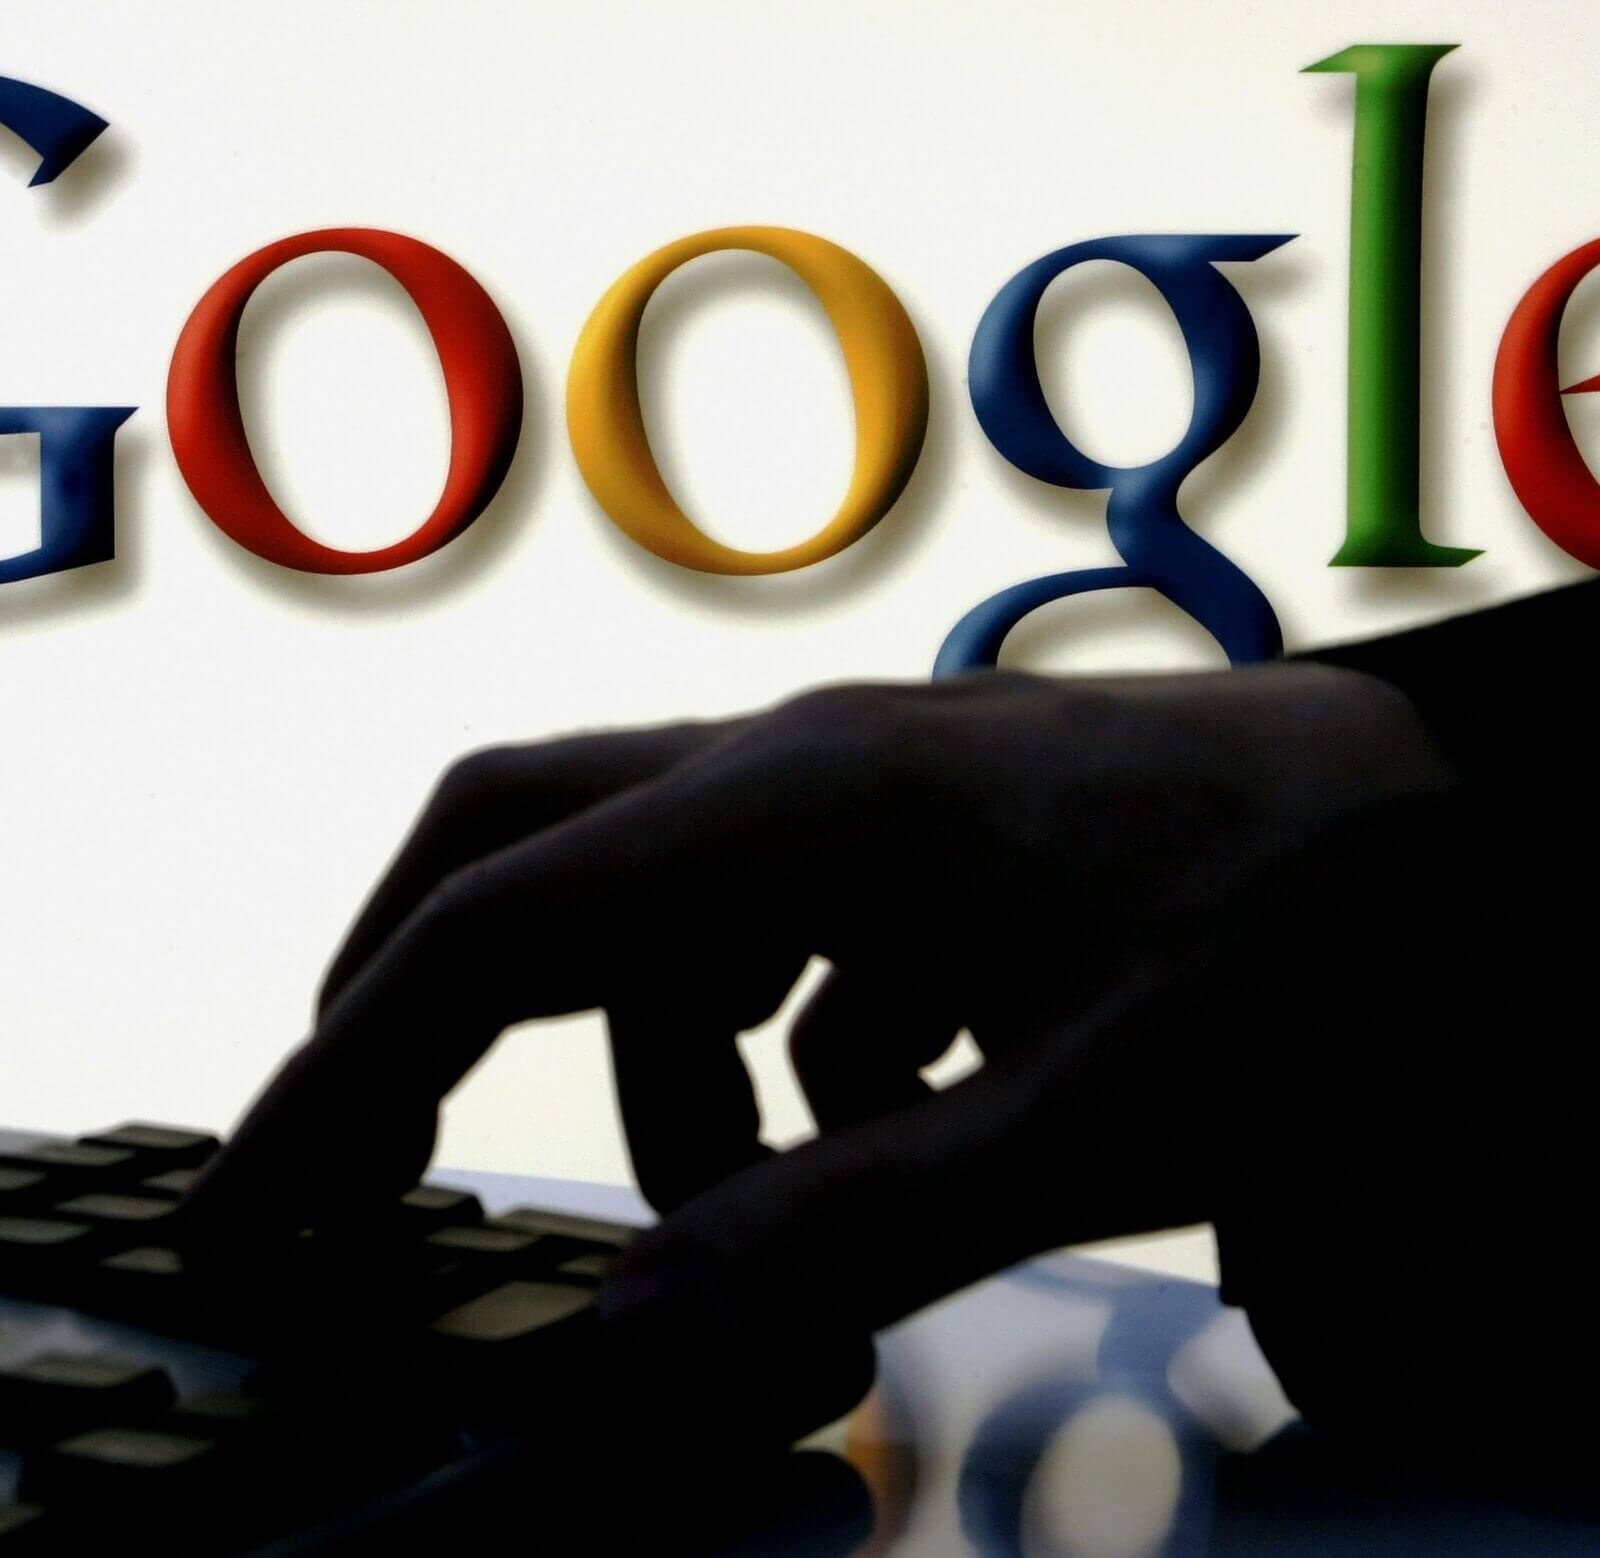 Google banned 58 Iranian-based accounts suspected in a 'politically motivated phishing' operation